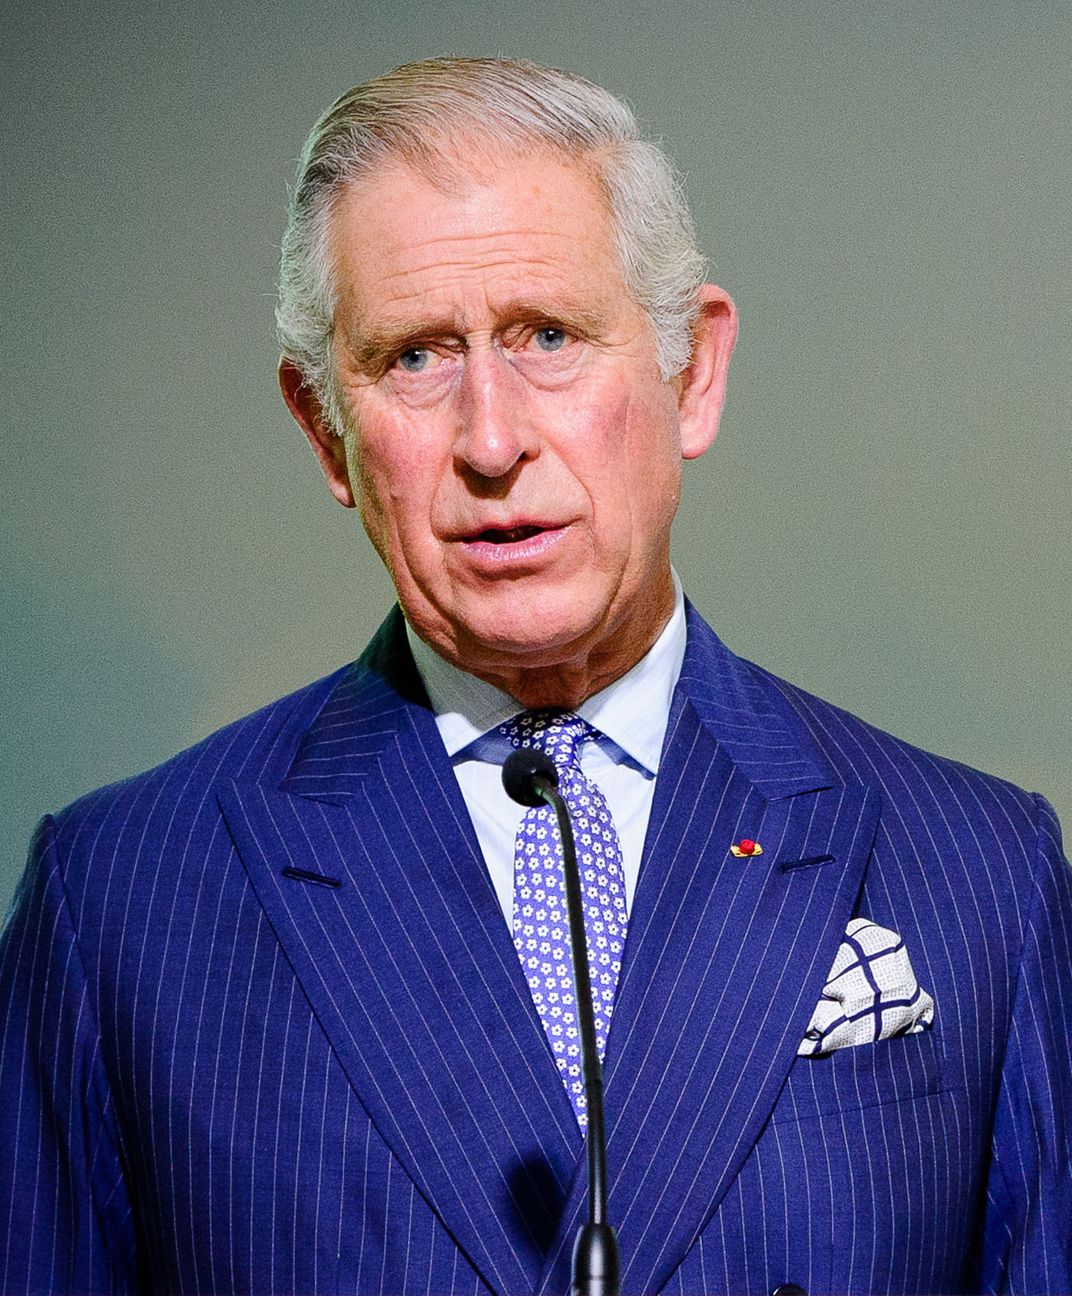 picture of elderly white man in blue pin-striped suit and purple tie with white flowers